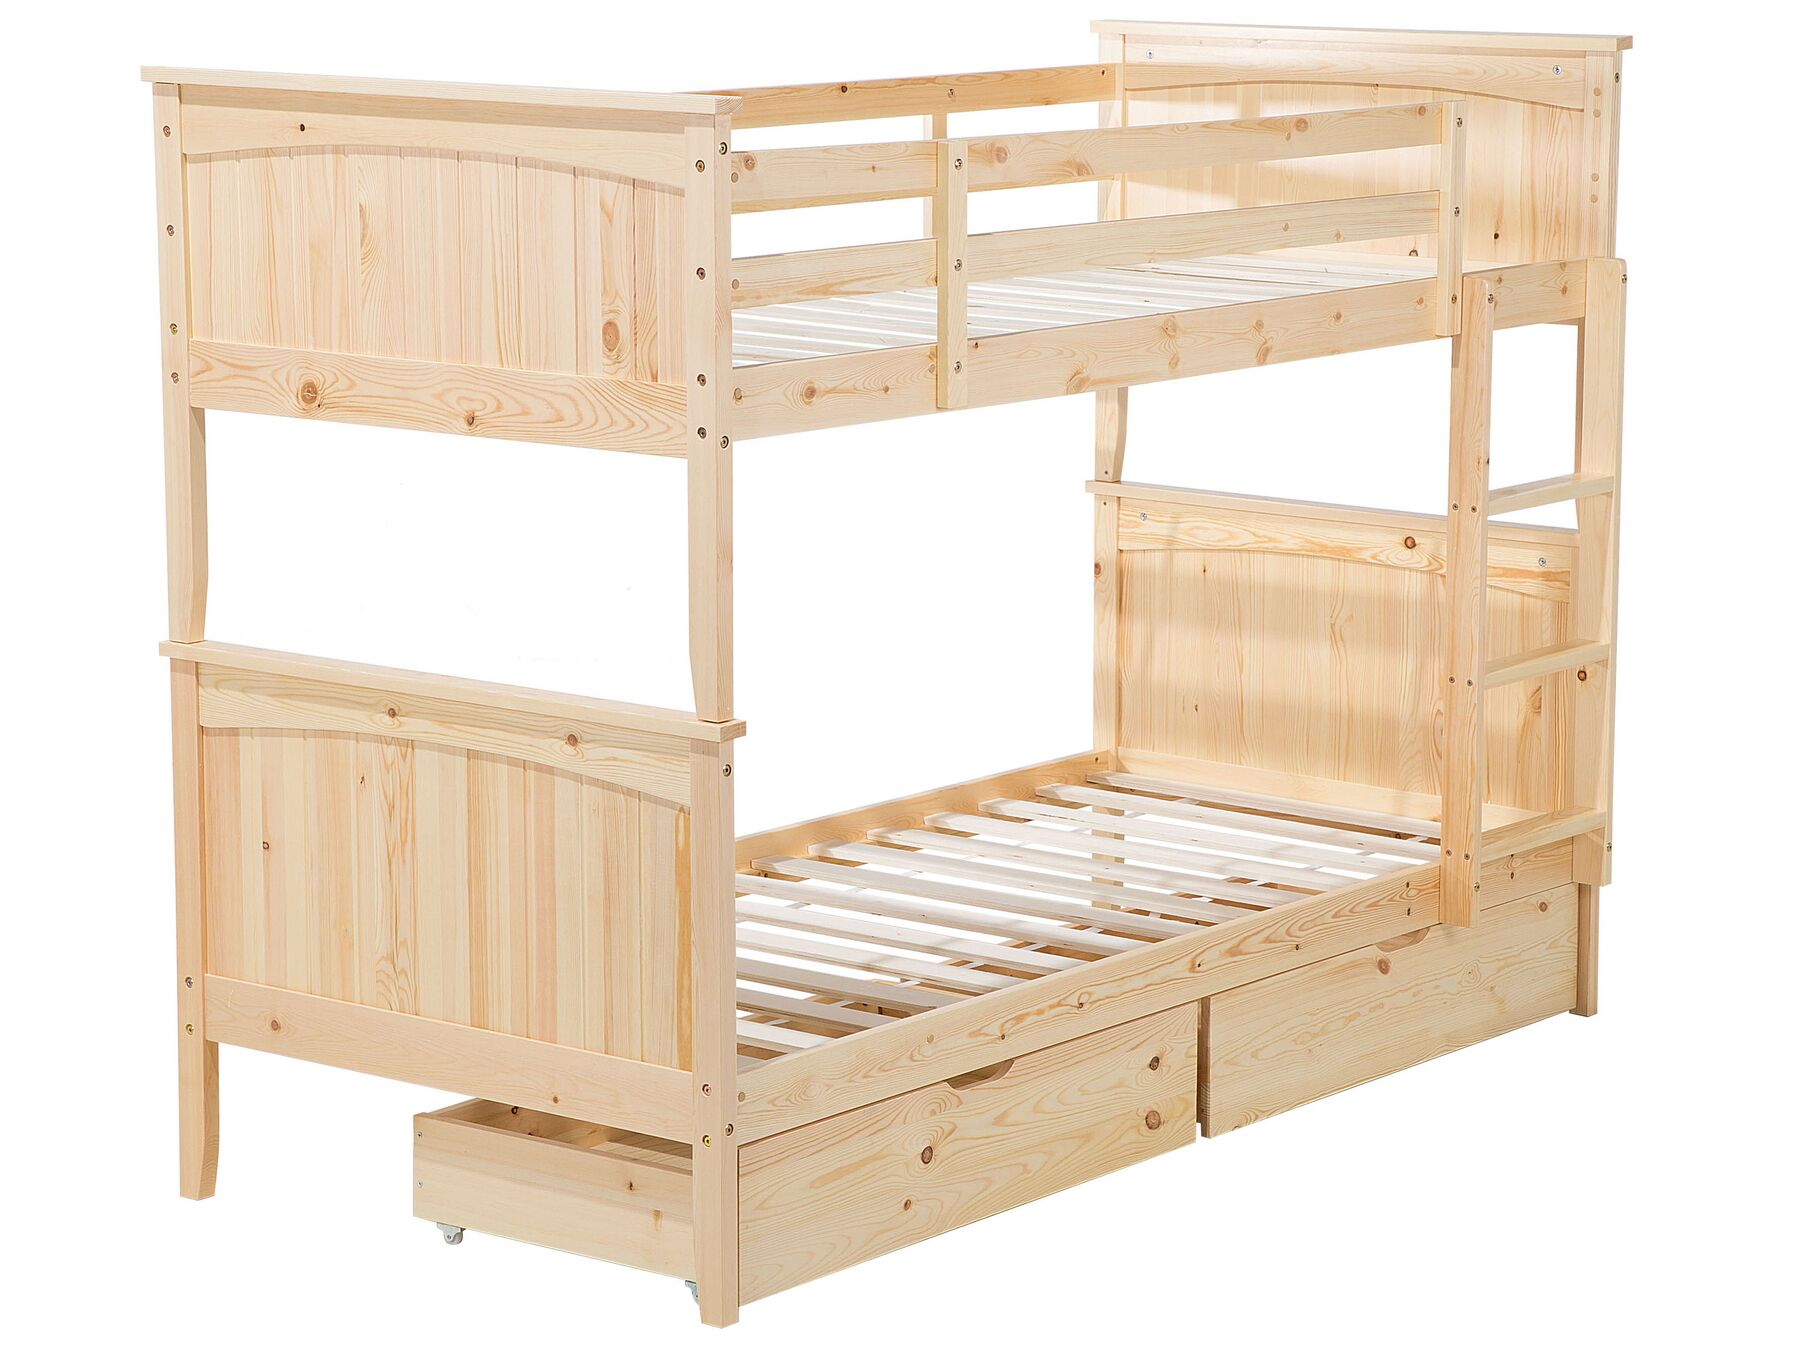 Wooden EU Single Size Bunk Bed with Storage Light Wood ALBON_883451